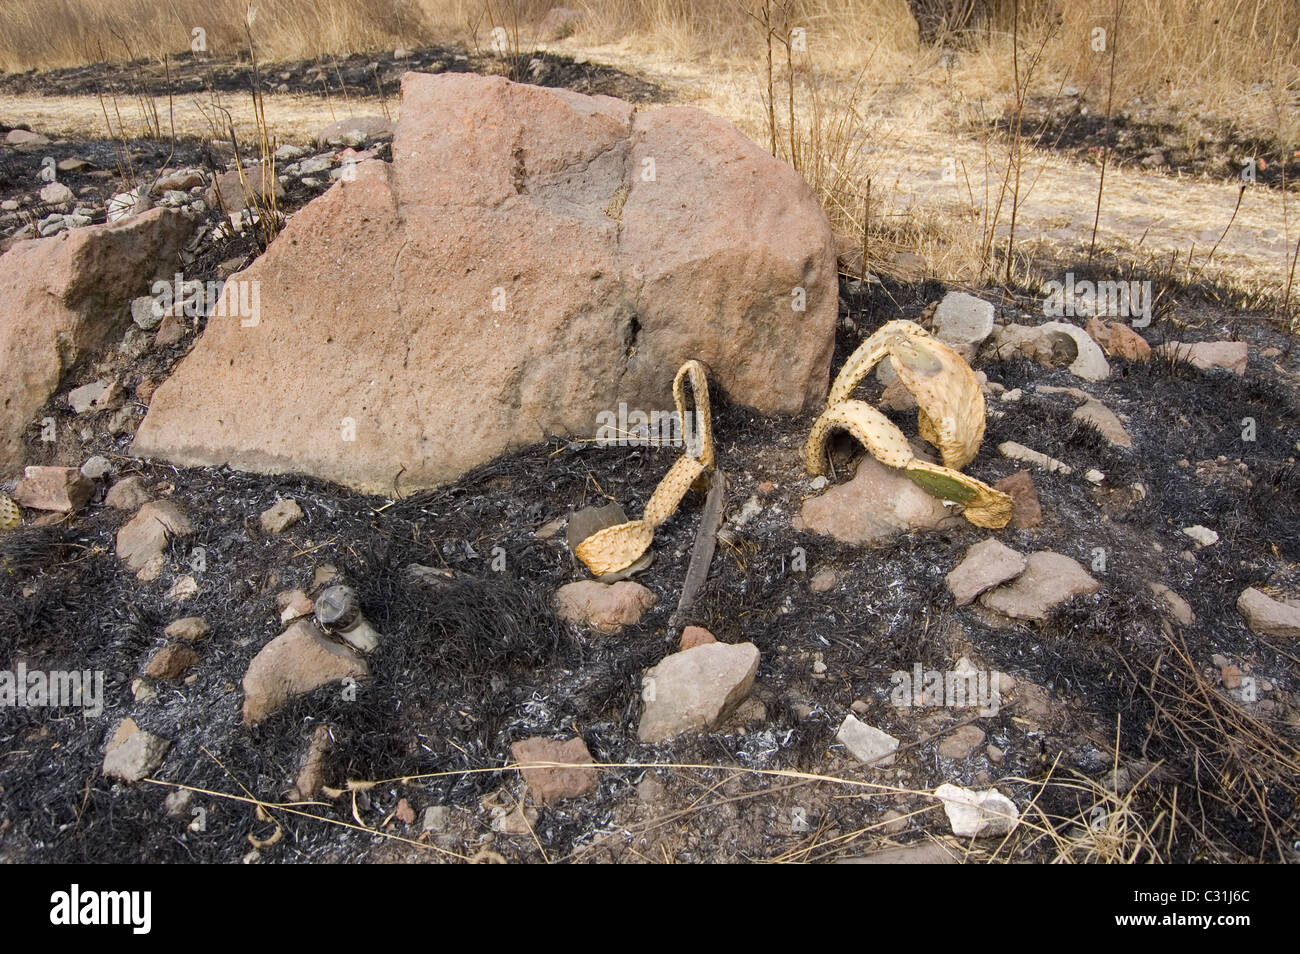 Burned prickly pear cactus. Caused by a fire. Stock Photo